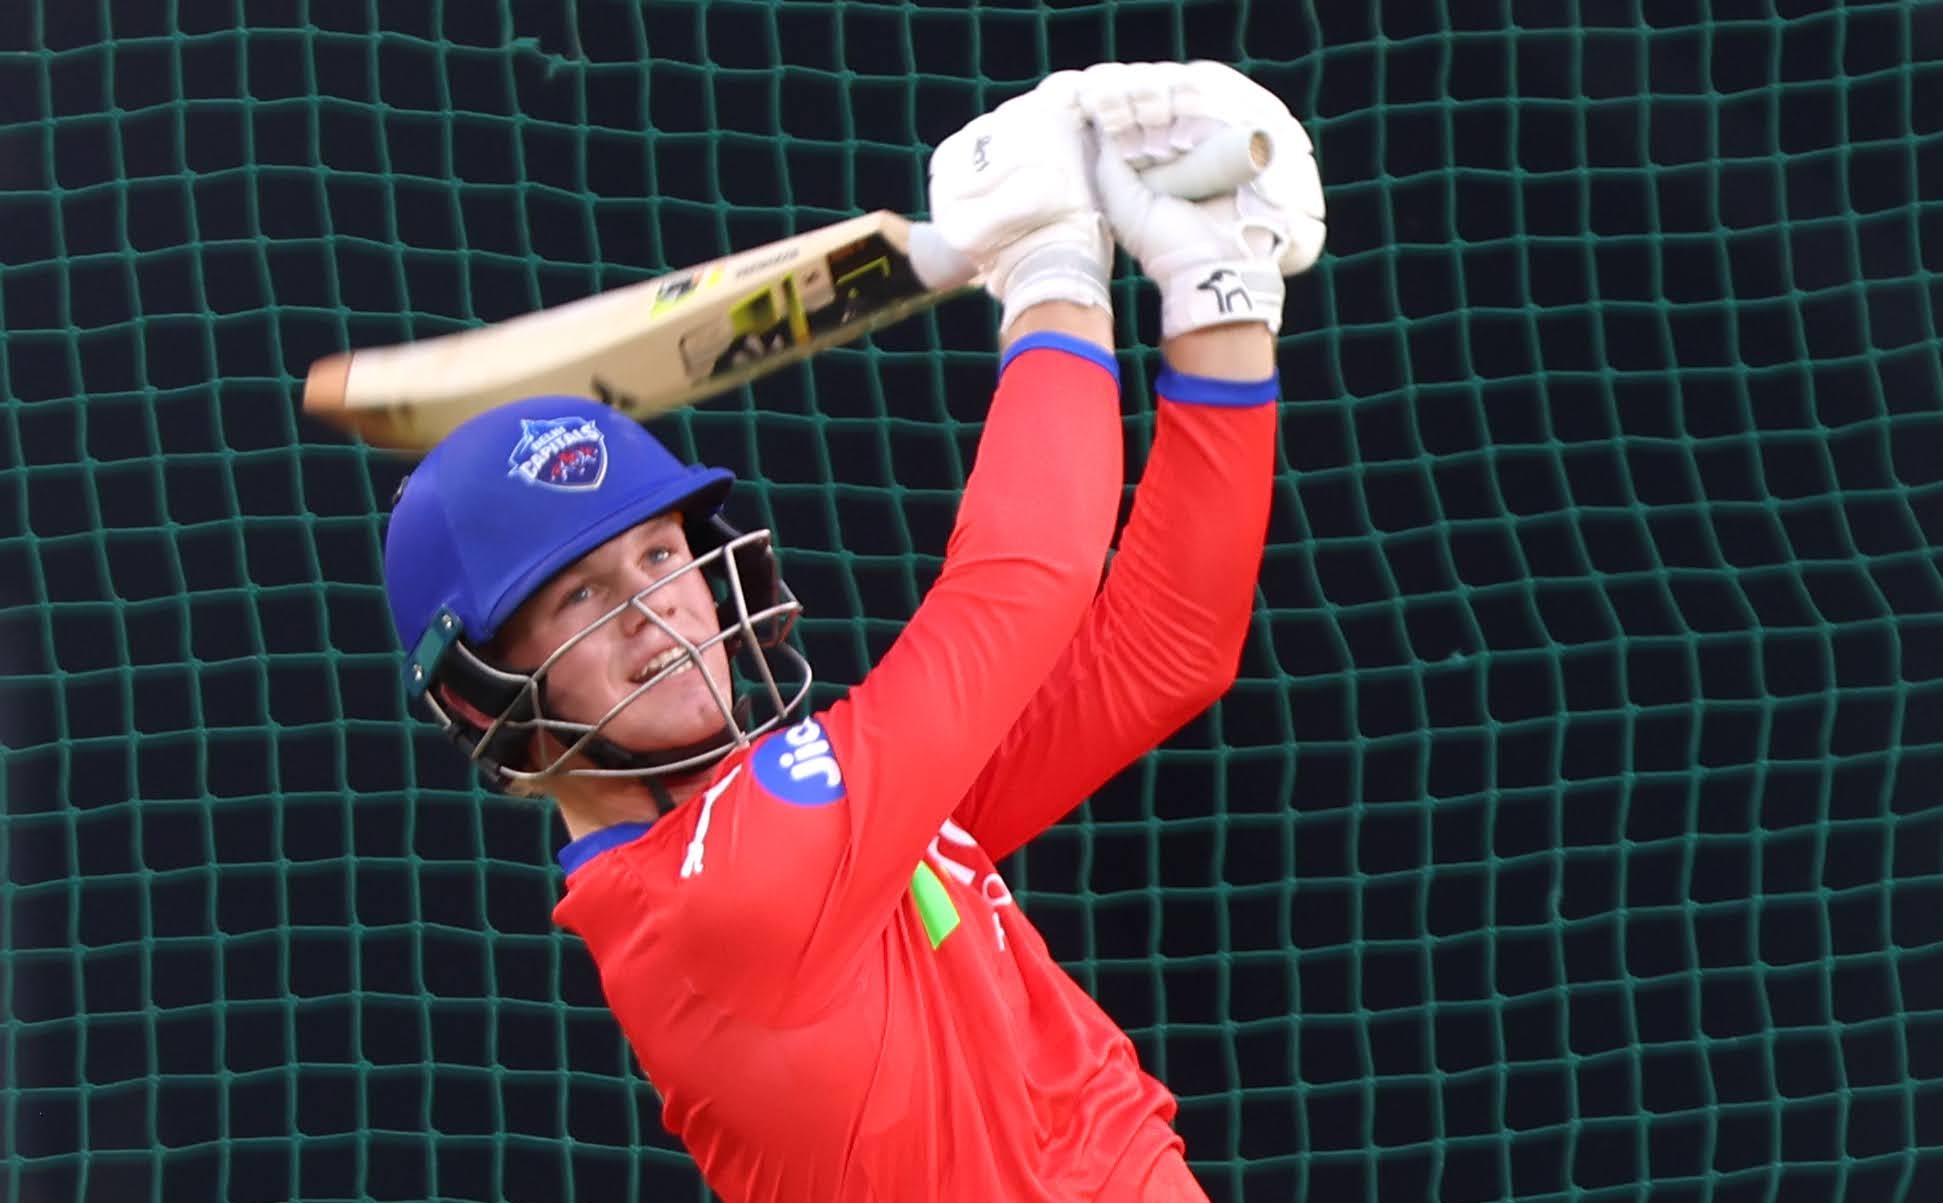 Delhi Capitals' young power-hitting duo of Stubbs and Fraser-McGurk talk about their IPL experience, bond over golf and beyond